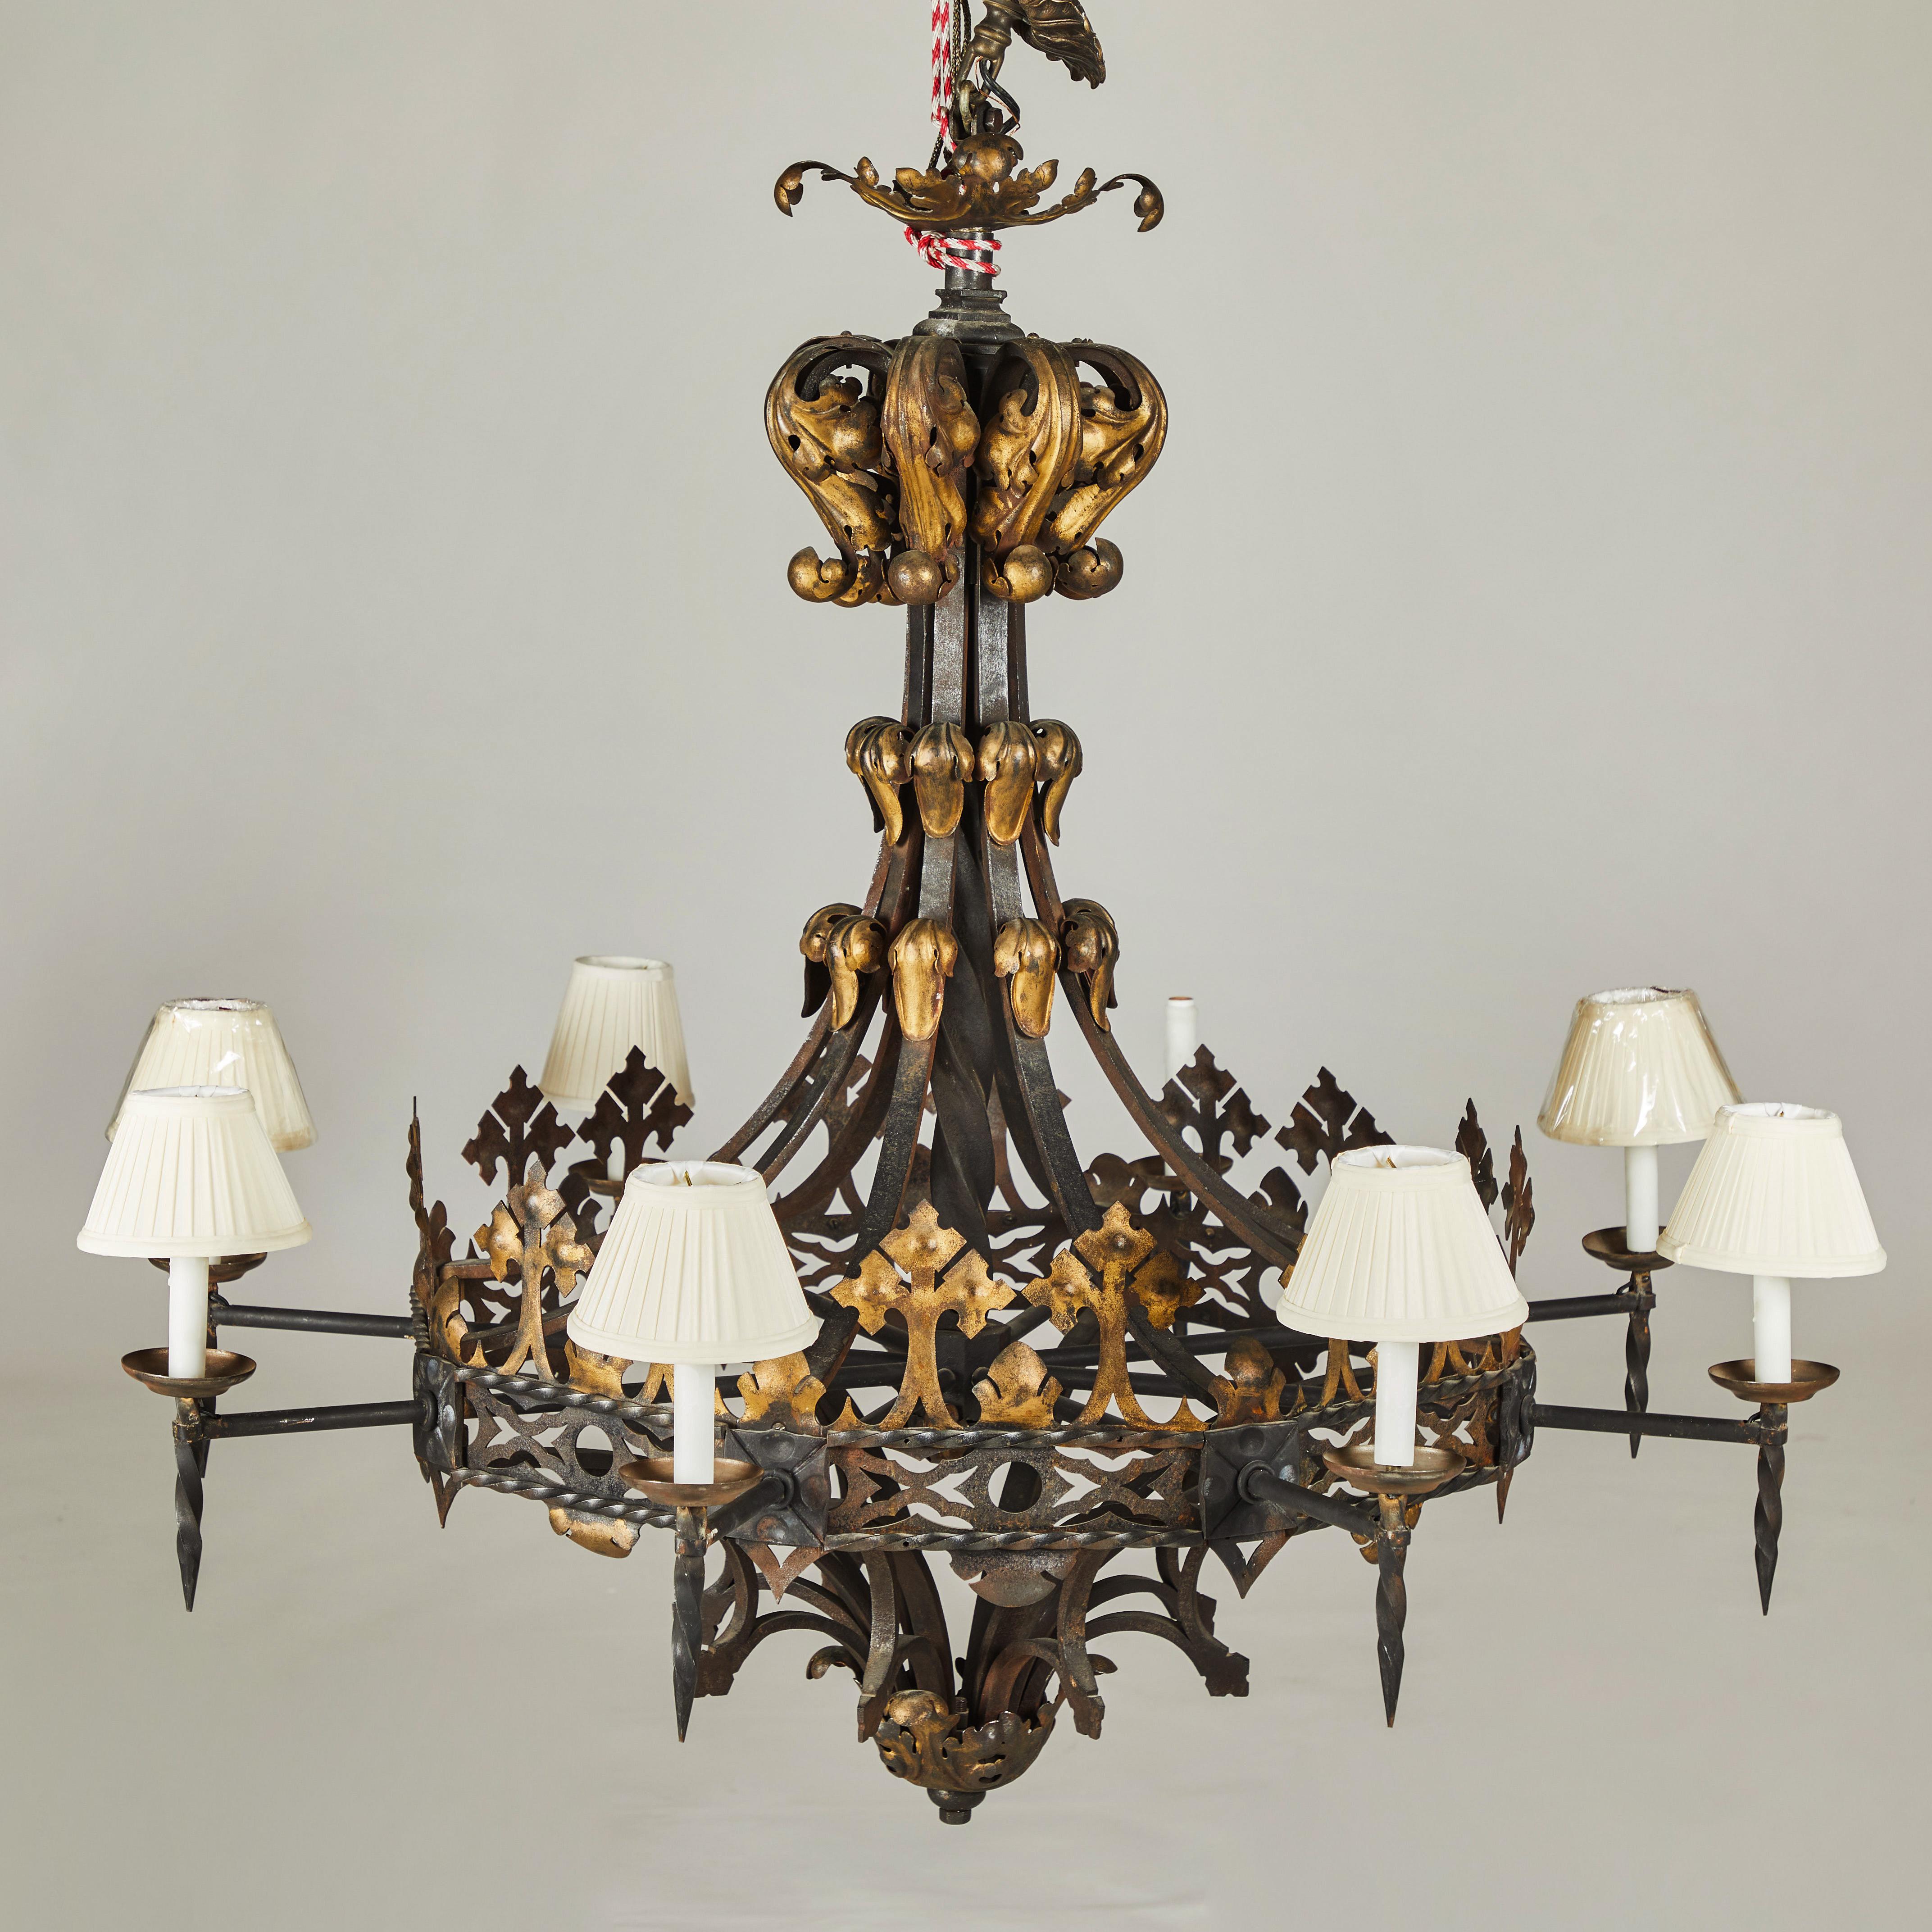 Gorgeous, large wrought iron and gilt decorated chandelier.
Elegantly sloped neck adorned with delicate gilded leaves. Eight arms terminate in torchiere style candle holders,
Late 19th century.
Origin: France
Originally purchased at Sotheby’s London